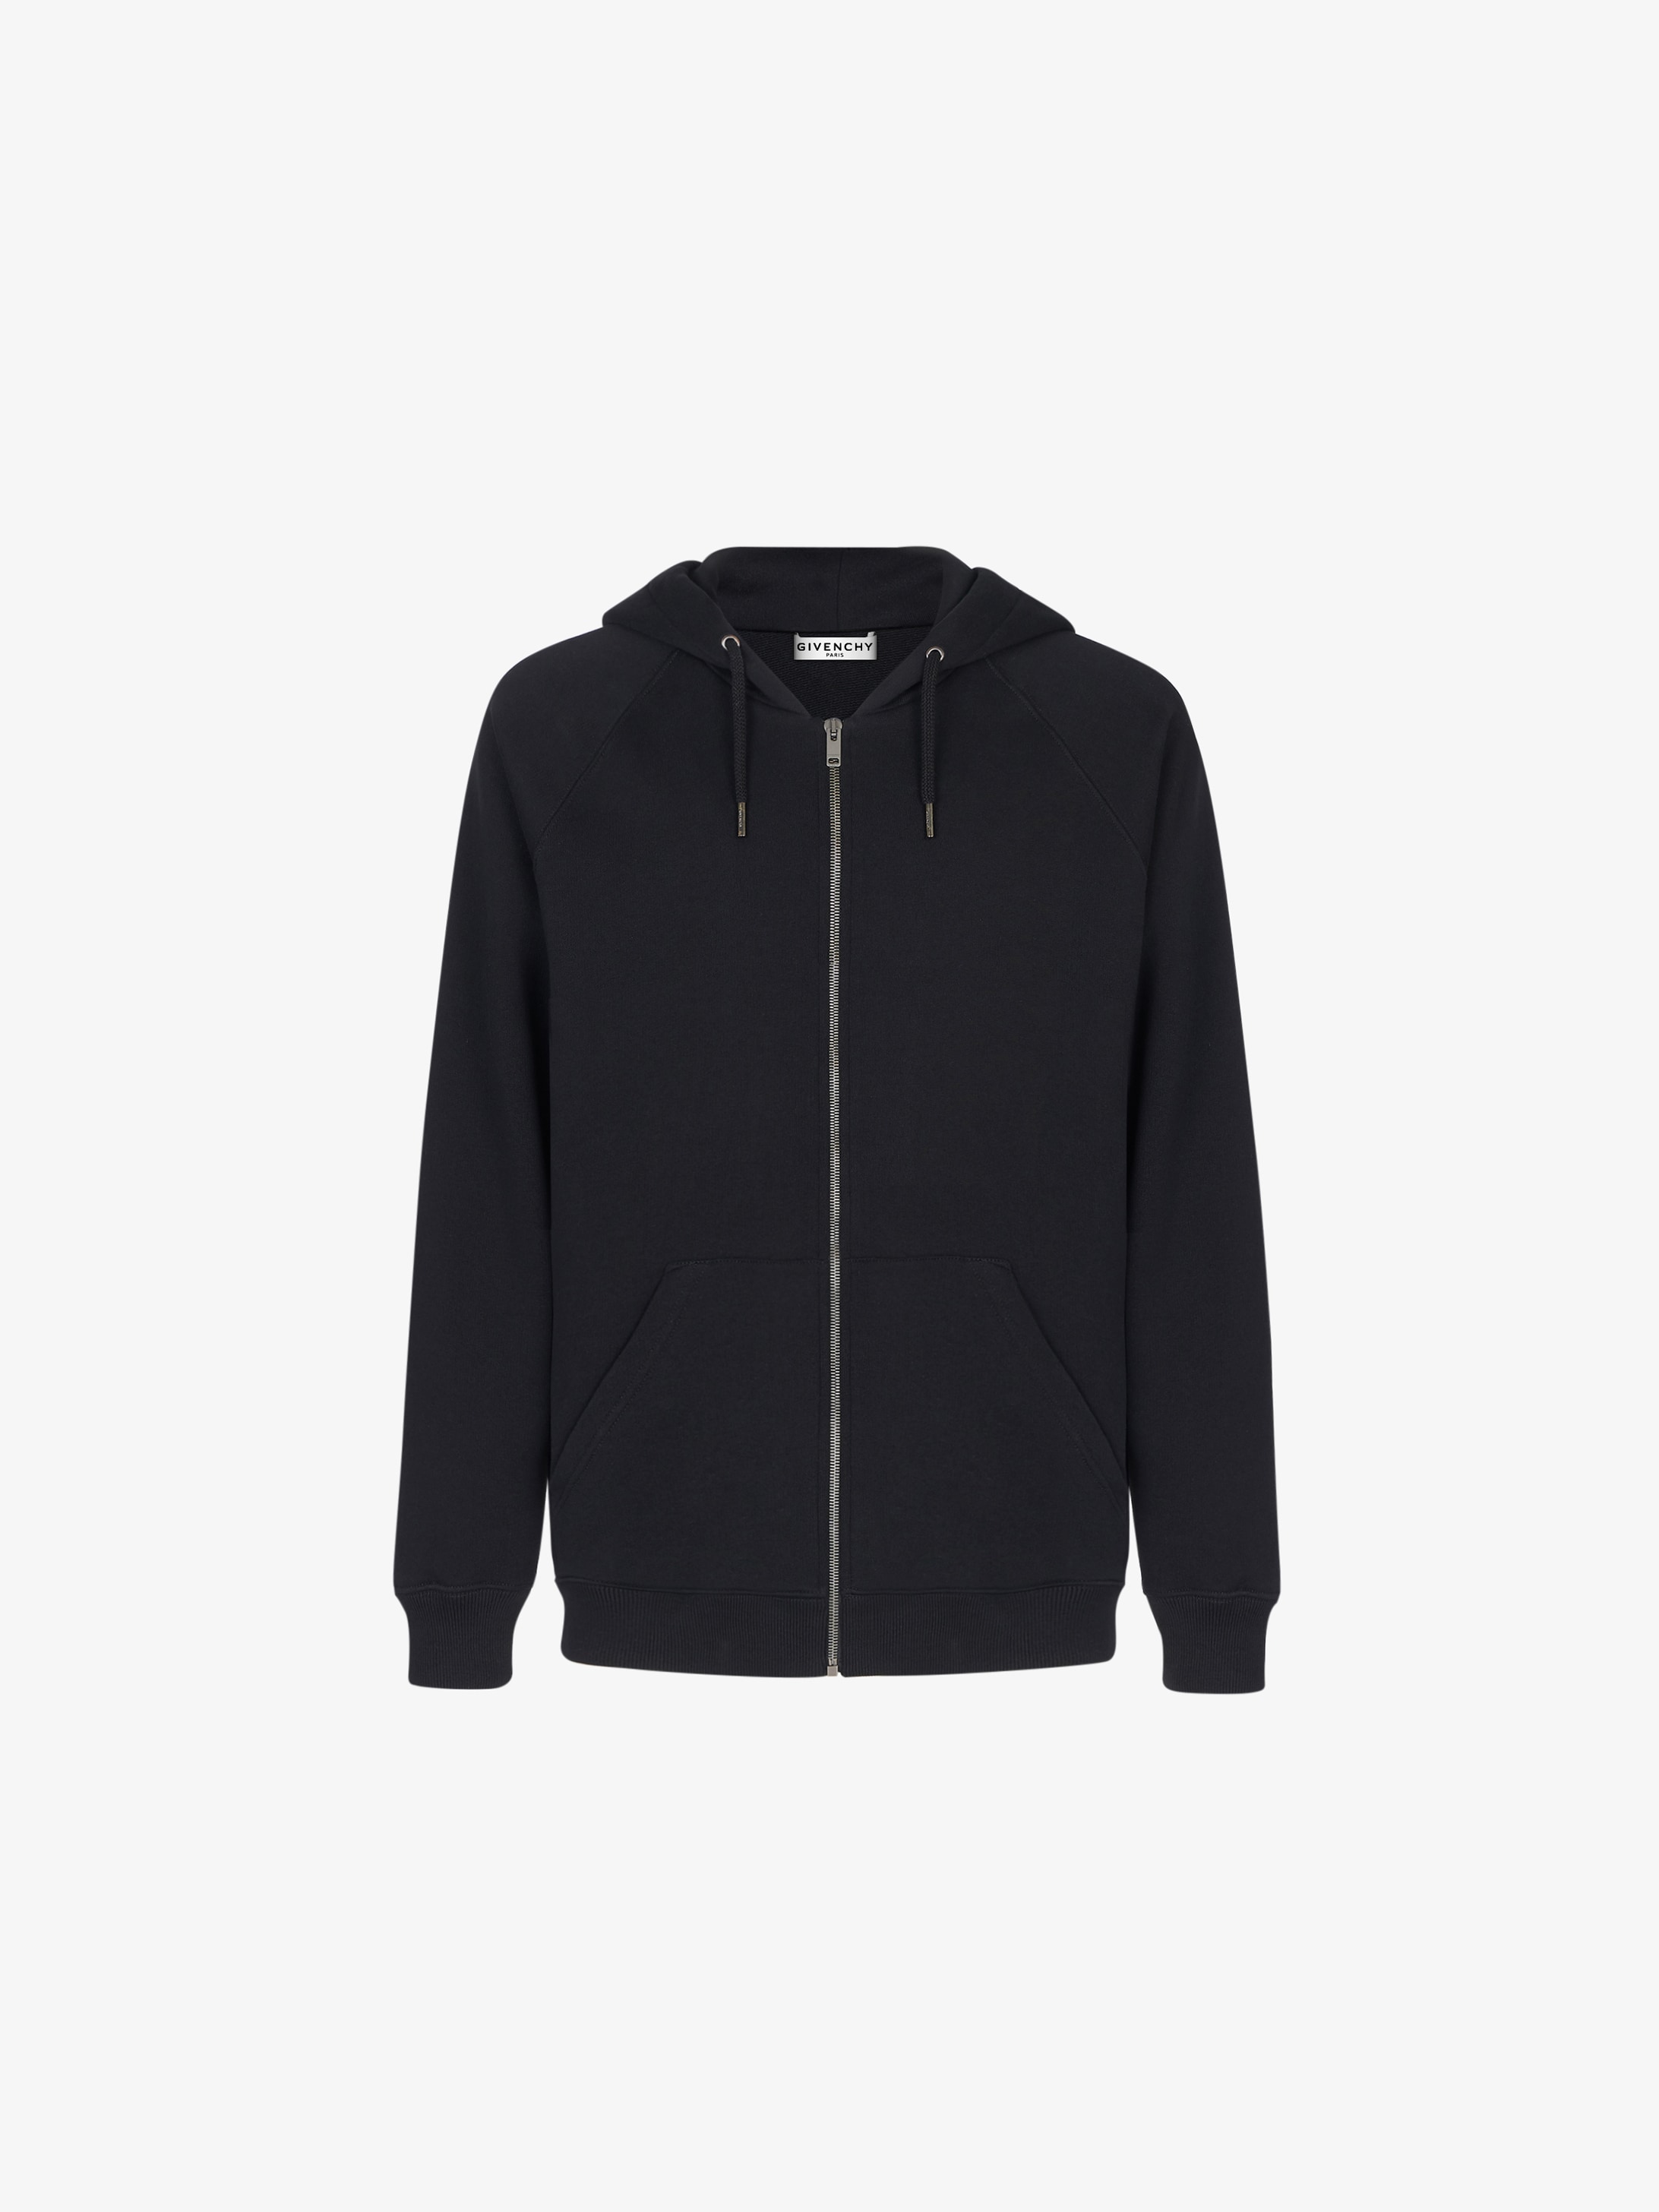 GIVENCHY zipped hoodie | GIVENCHY Paris